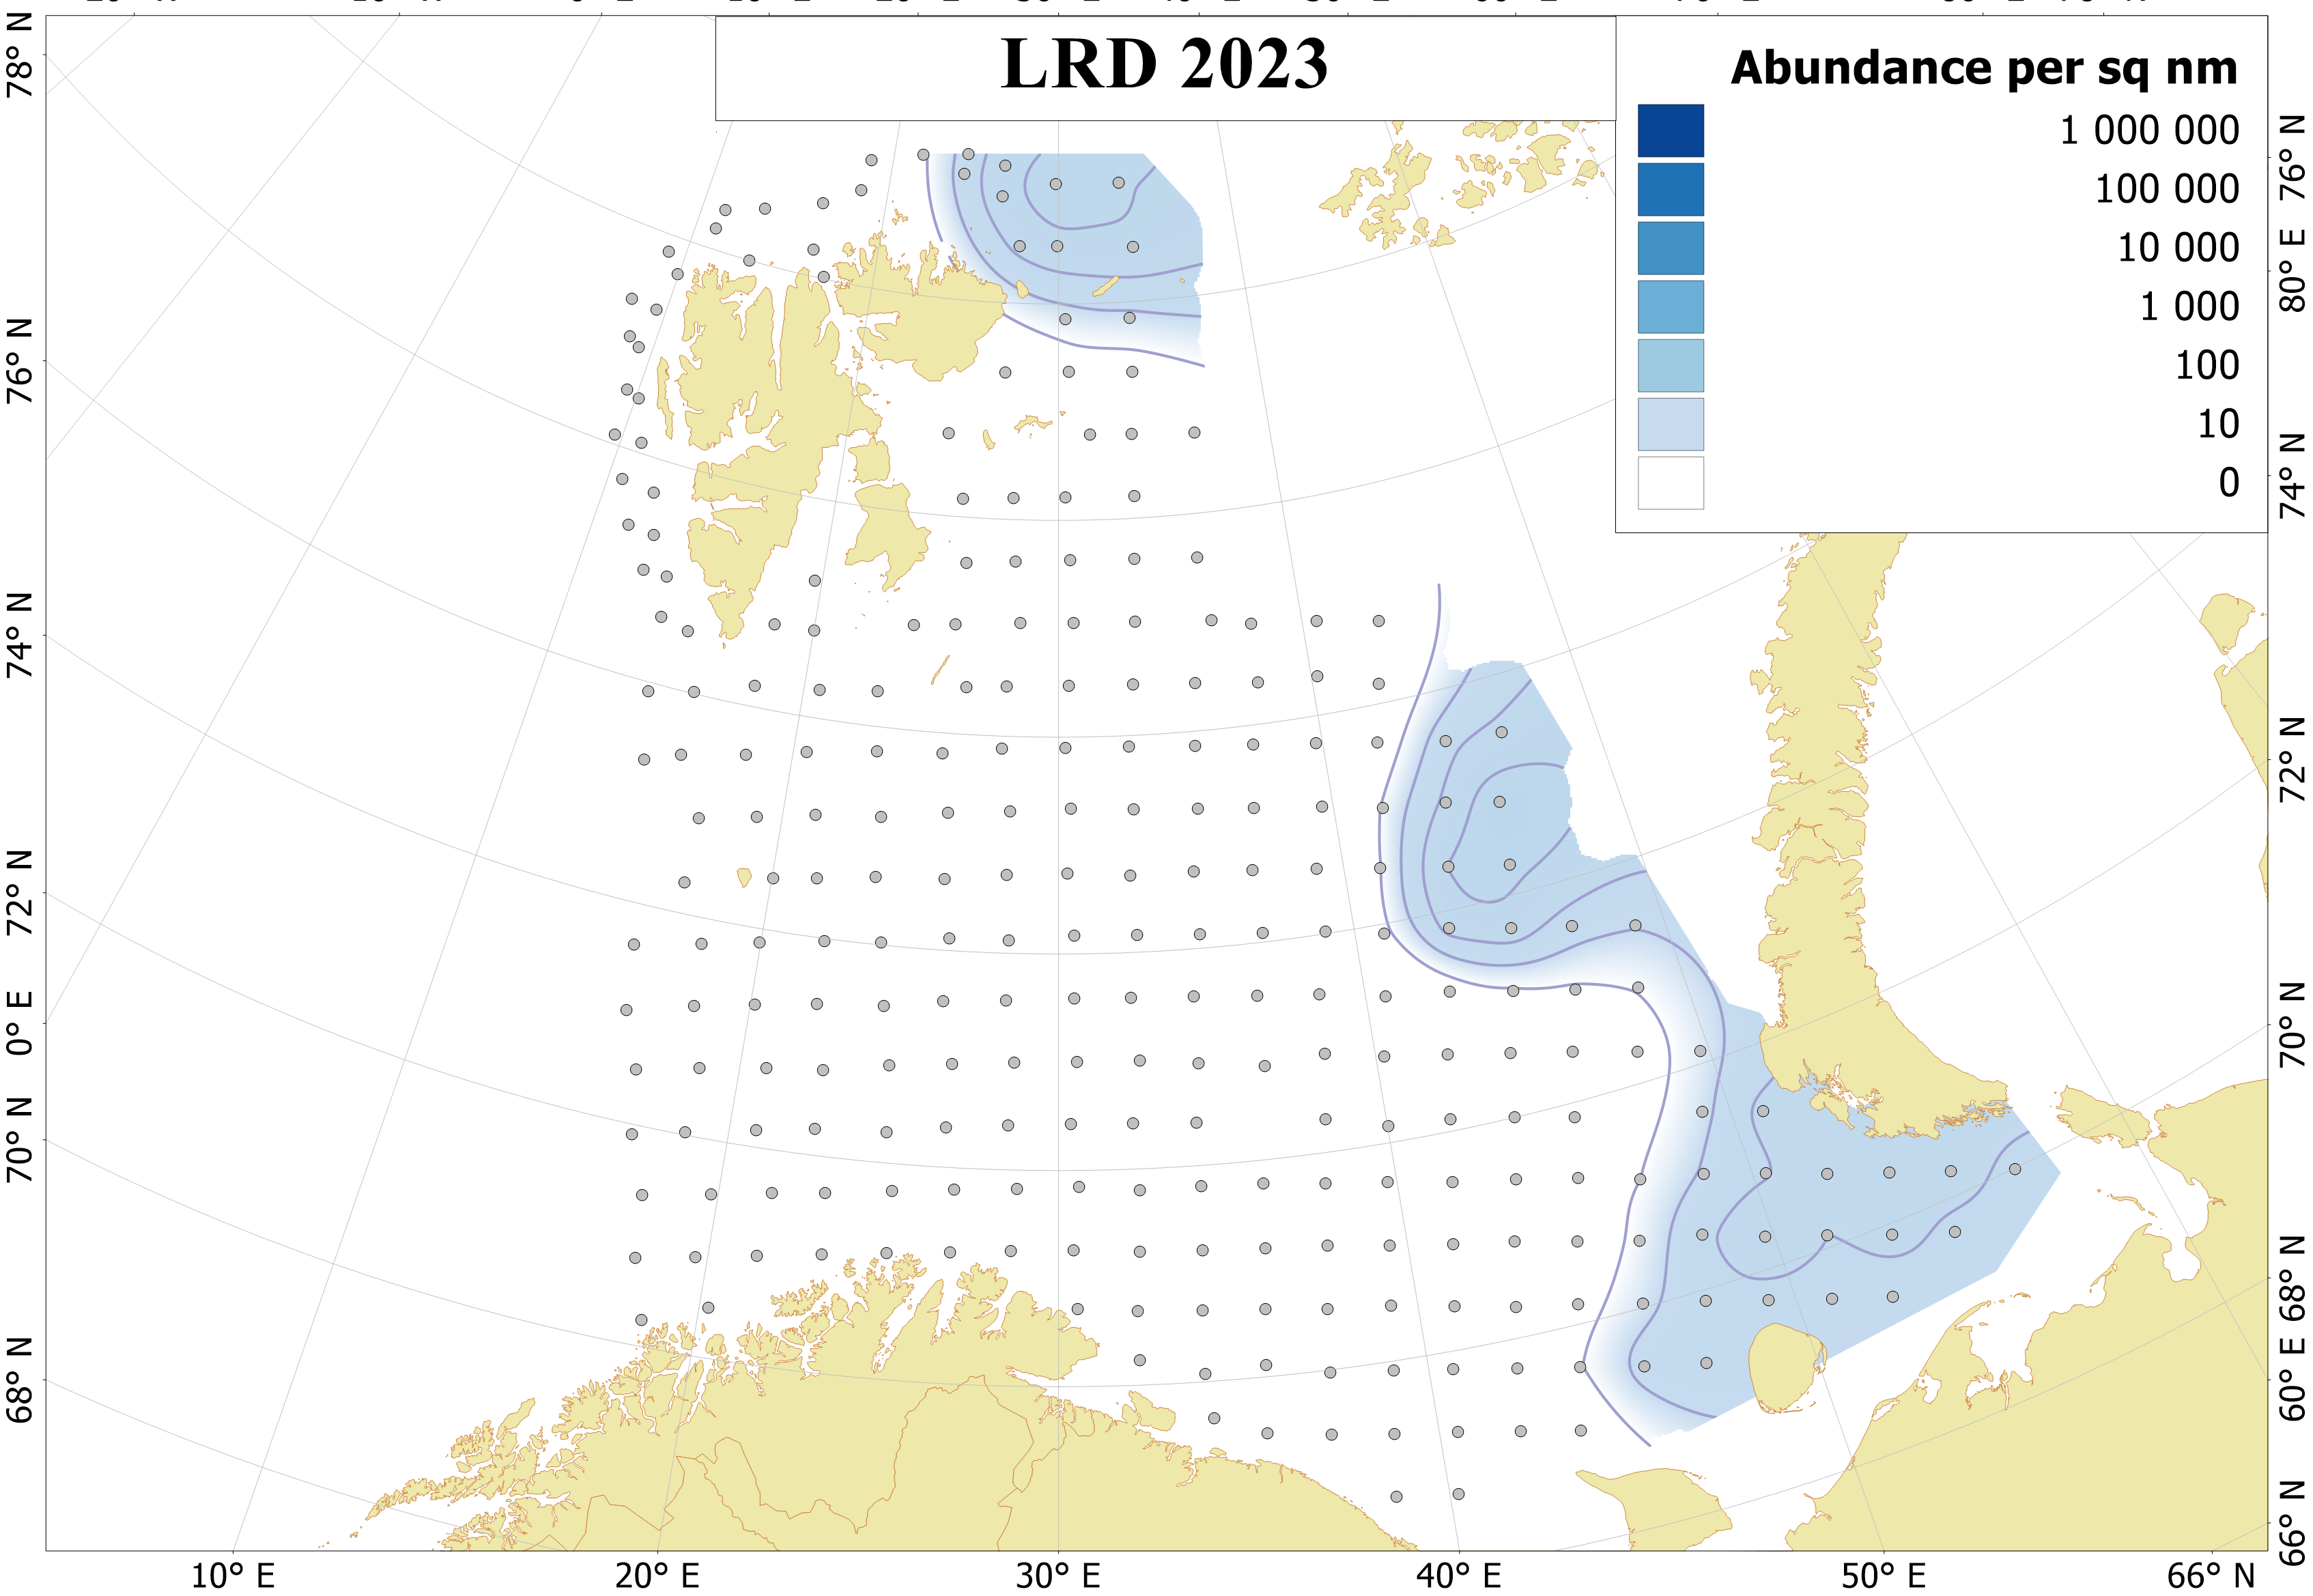 Figure 6.9.1. Distribution of 0-group long rough dab, August-September 2023. Dots indicate sampling locations. Abundance not corrected for capture efficiency.